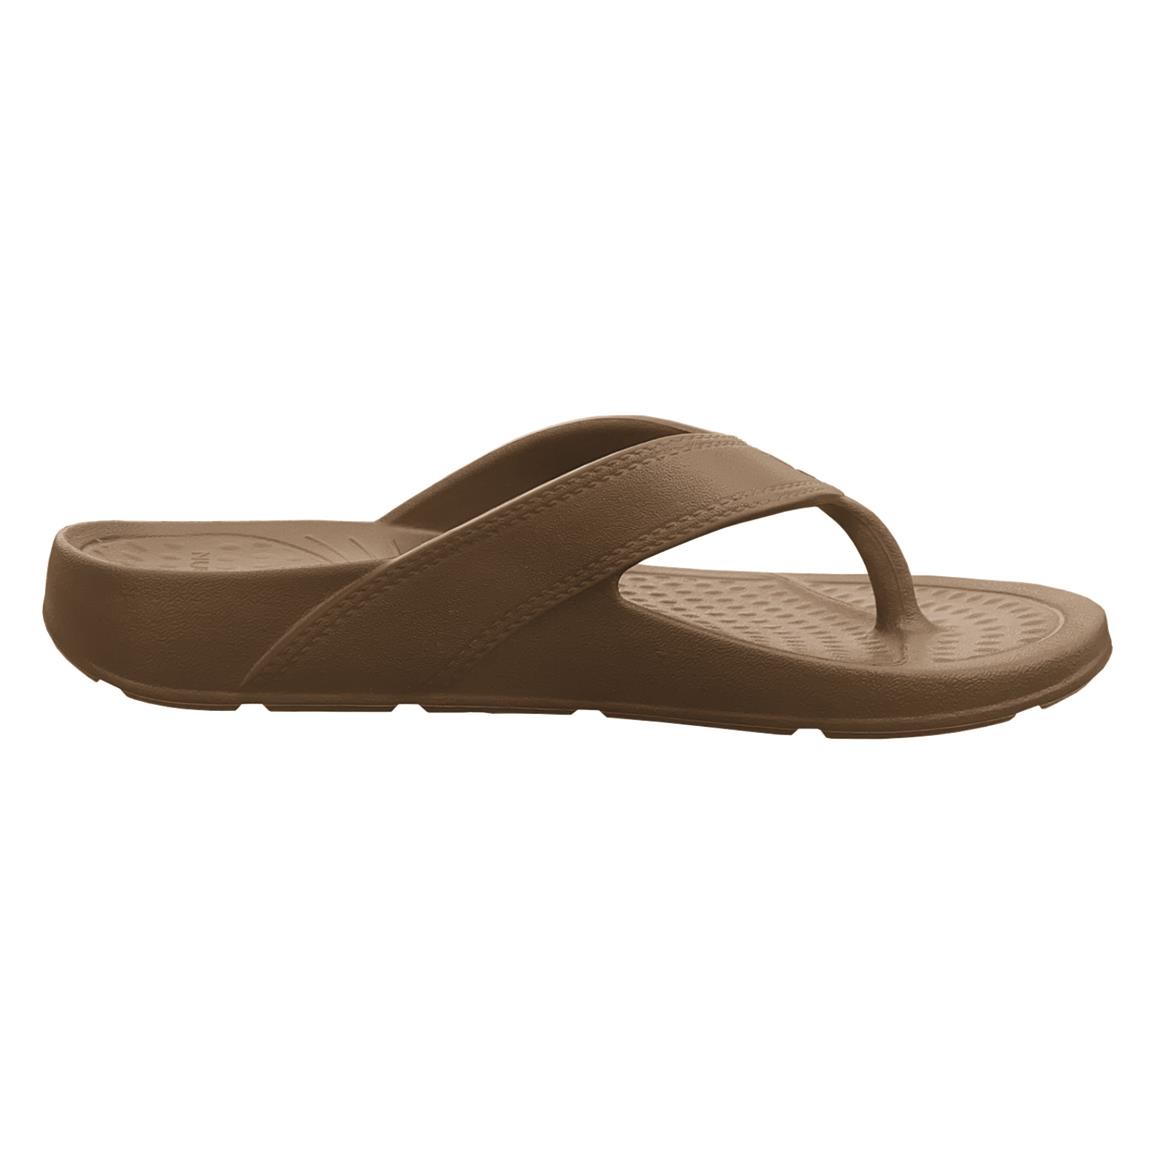 Frogg Toggs Men's River Sandals - 731674, Sandals at Sportsman's Guide